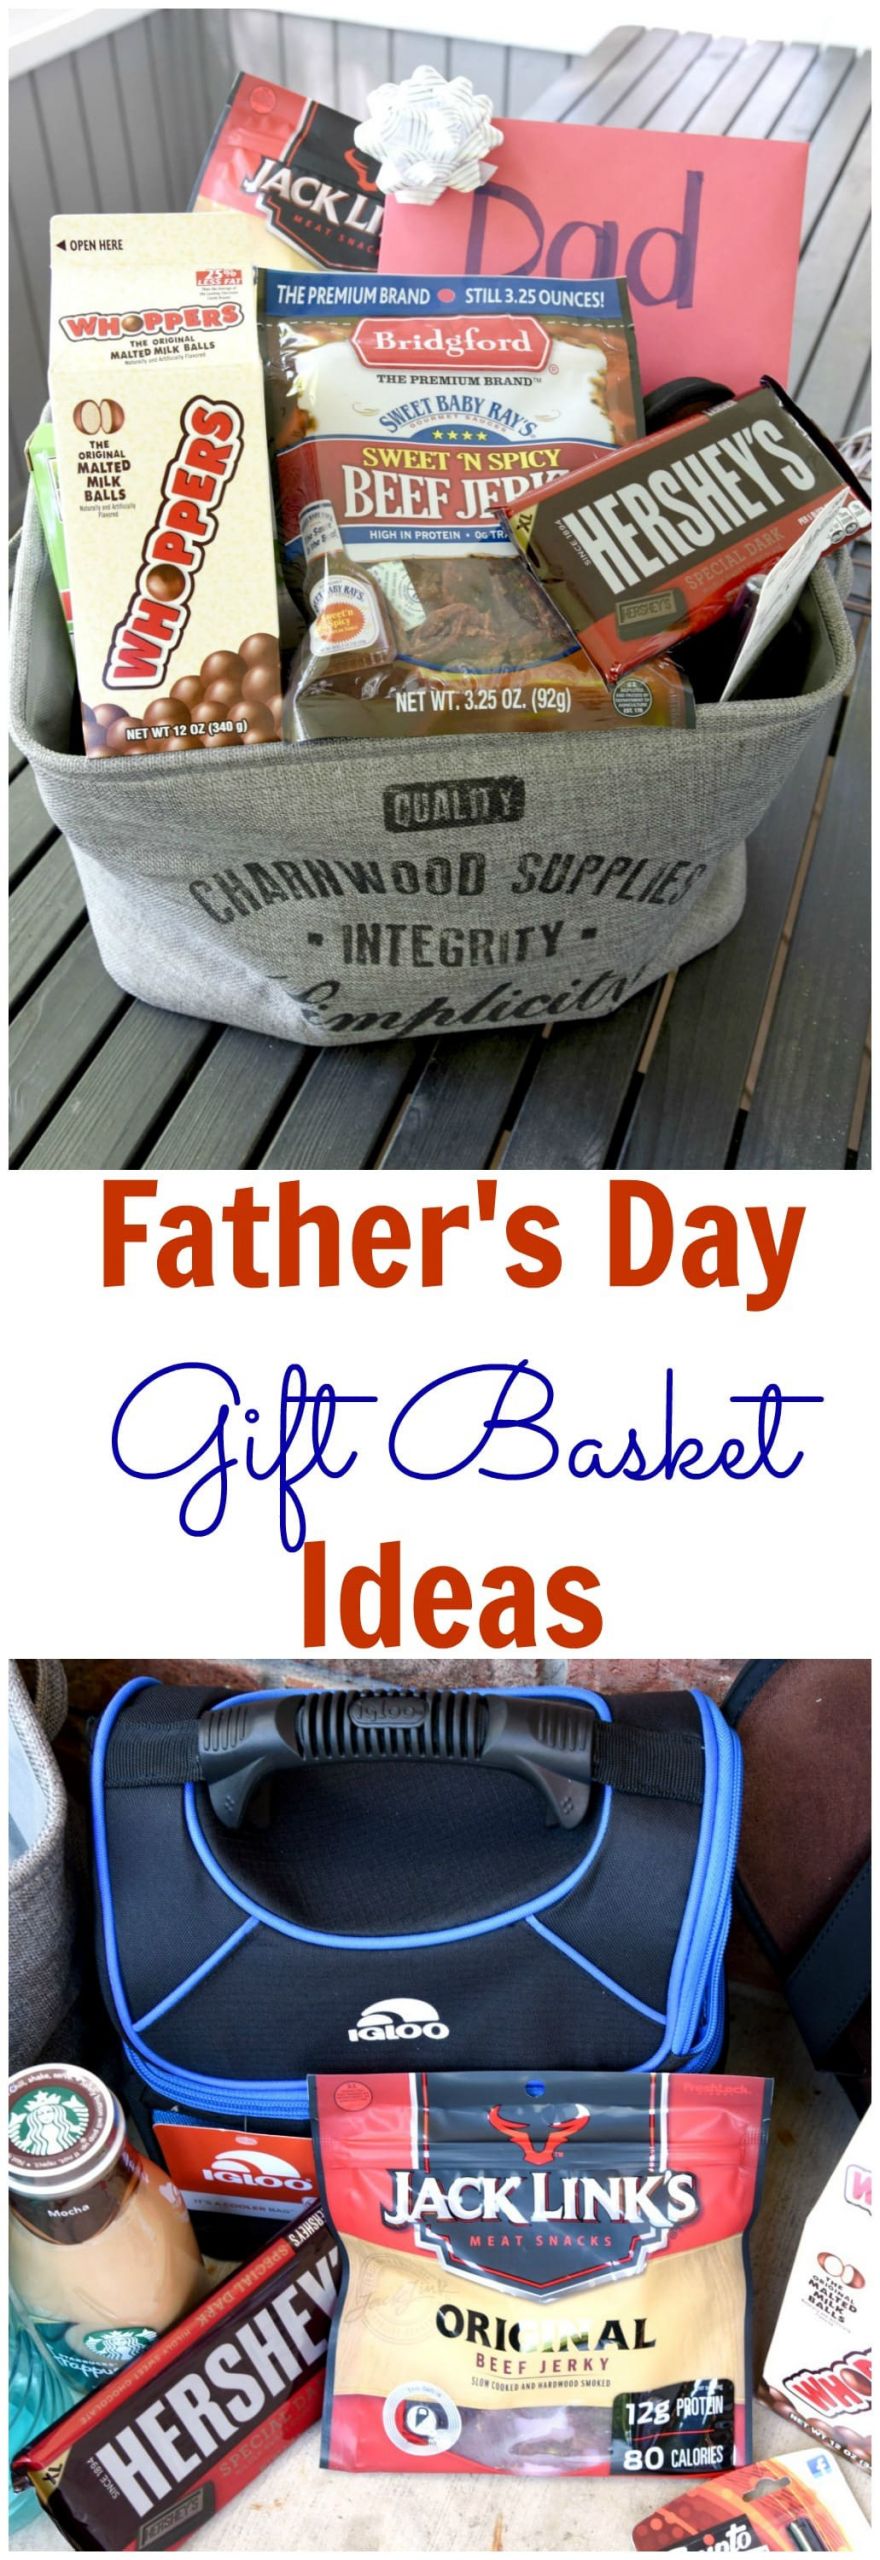 Father'S Day Gift Basket Ideas
 Tips to Create a Father s Day Gift Basket Dad will Love